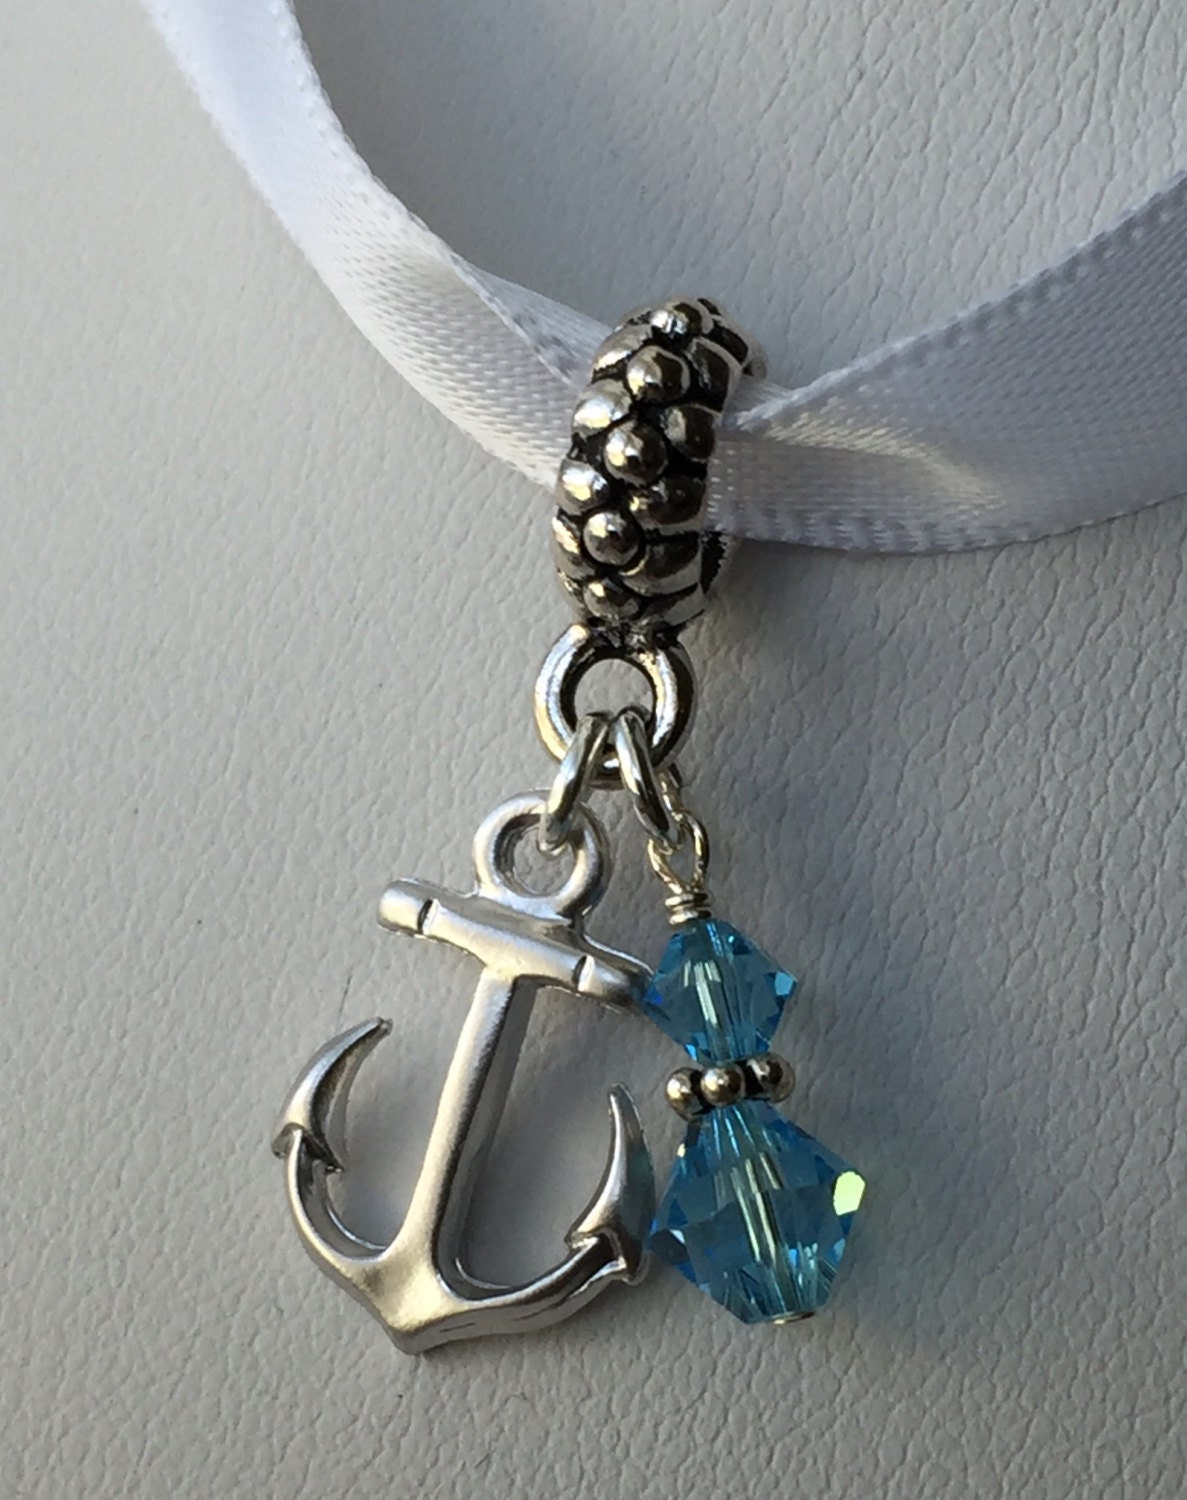 Something Blue Anchor Bouquet Charm,Something Blue Bouquet Charm,Something Blue Nautical Wedding Bouquet Charm,Keepsake Gift for the Bride